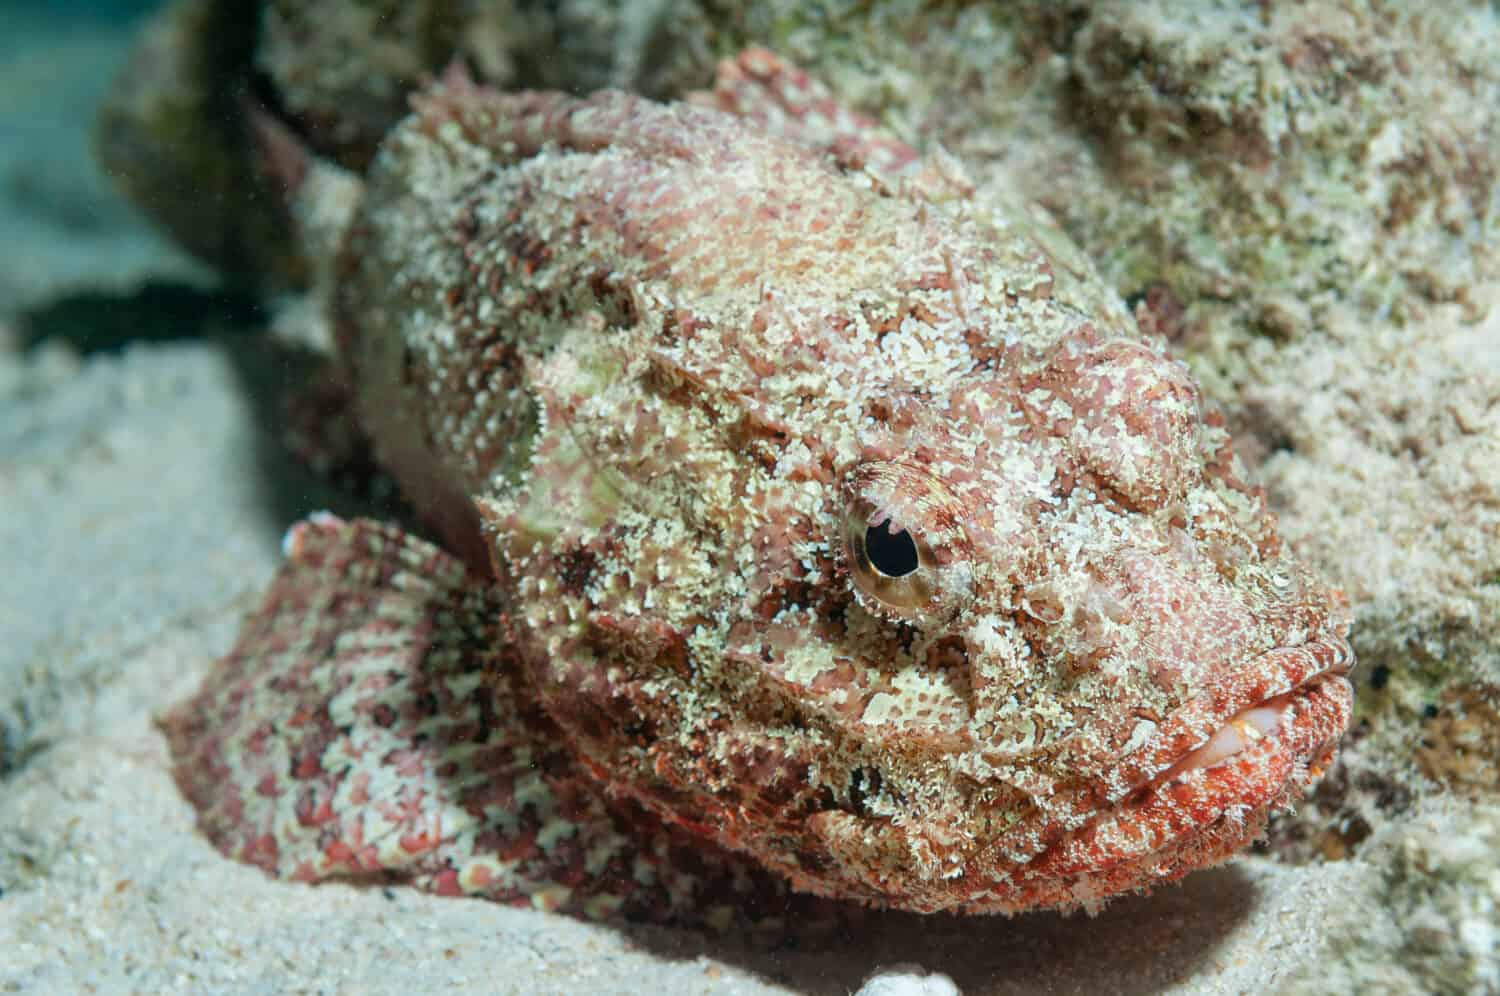 Spotted scorpionfish (Scorpaena plumieri) have spines on their back which release venom when they are stepped on.